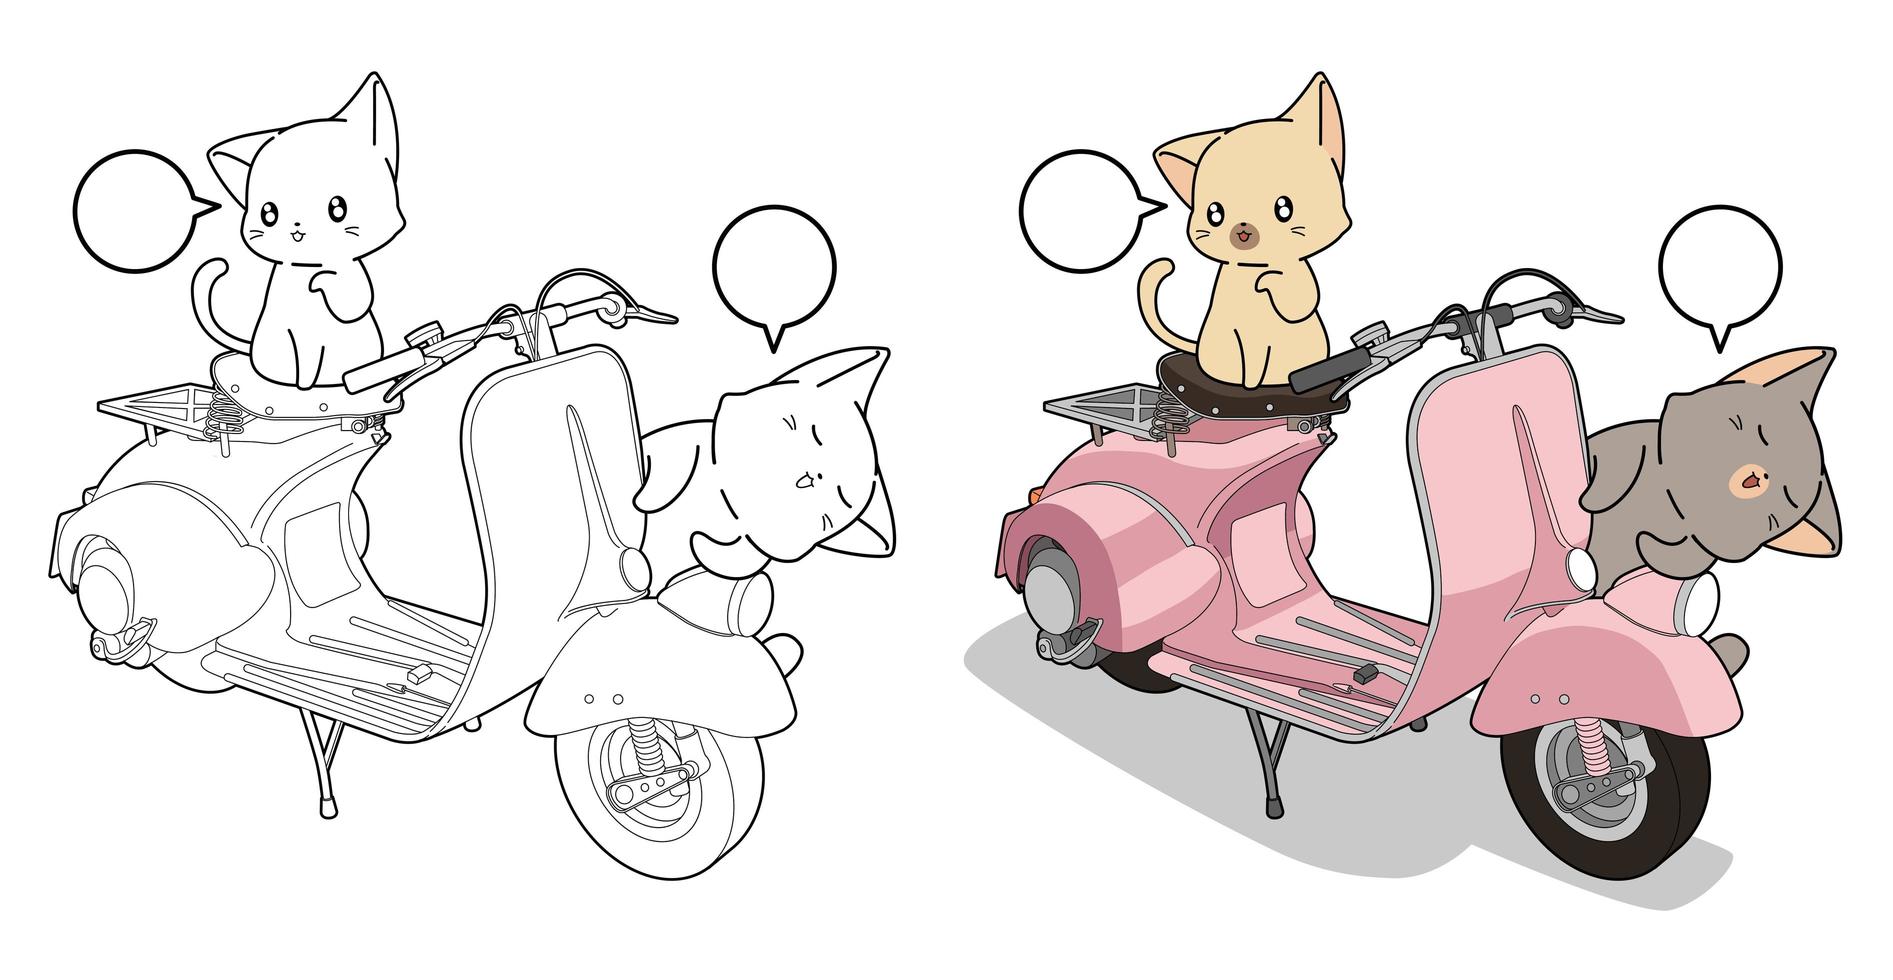 Adorable cats and motorcycle cartoon coloring page for kids vector